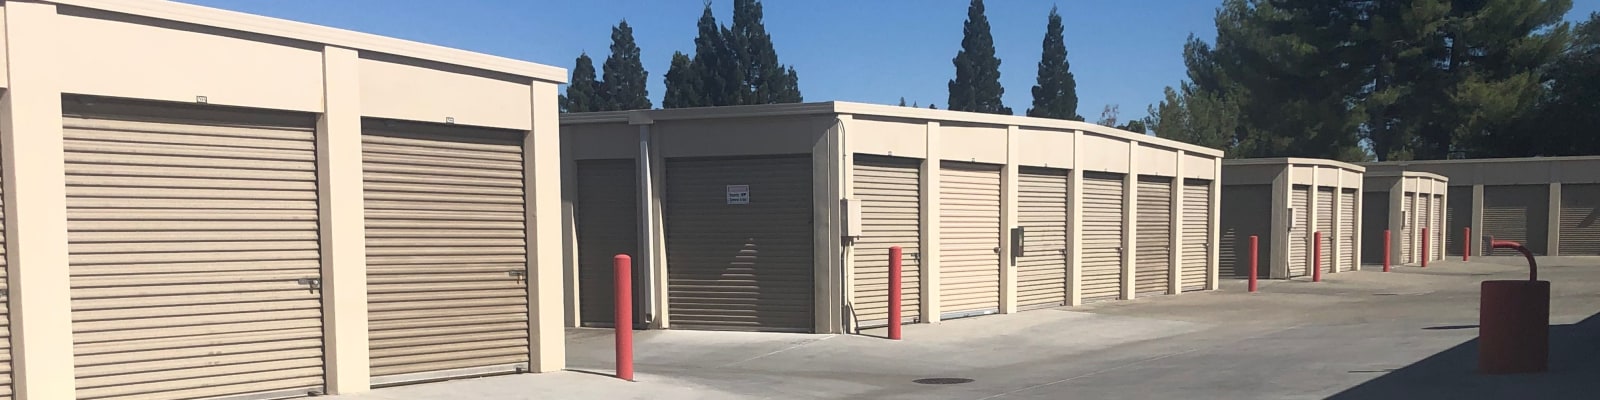 Storage features at Gold Country Self Storage in Folsom, California